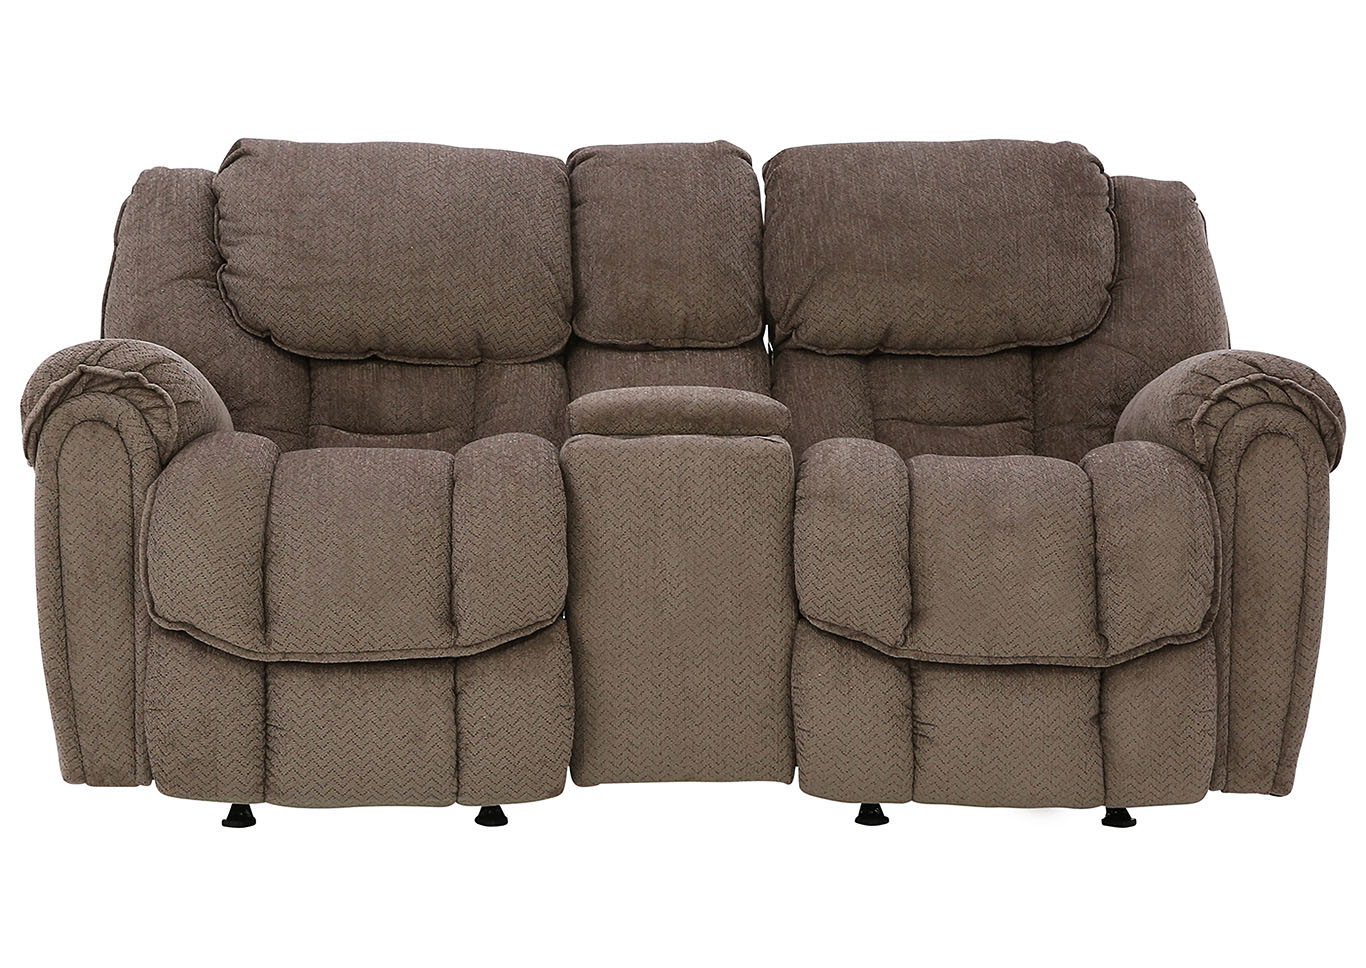 BAXTER TAUPE RECLINING LOVESEAT WITH CONSOLE